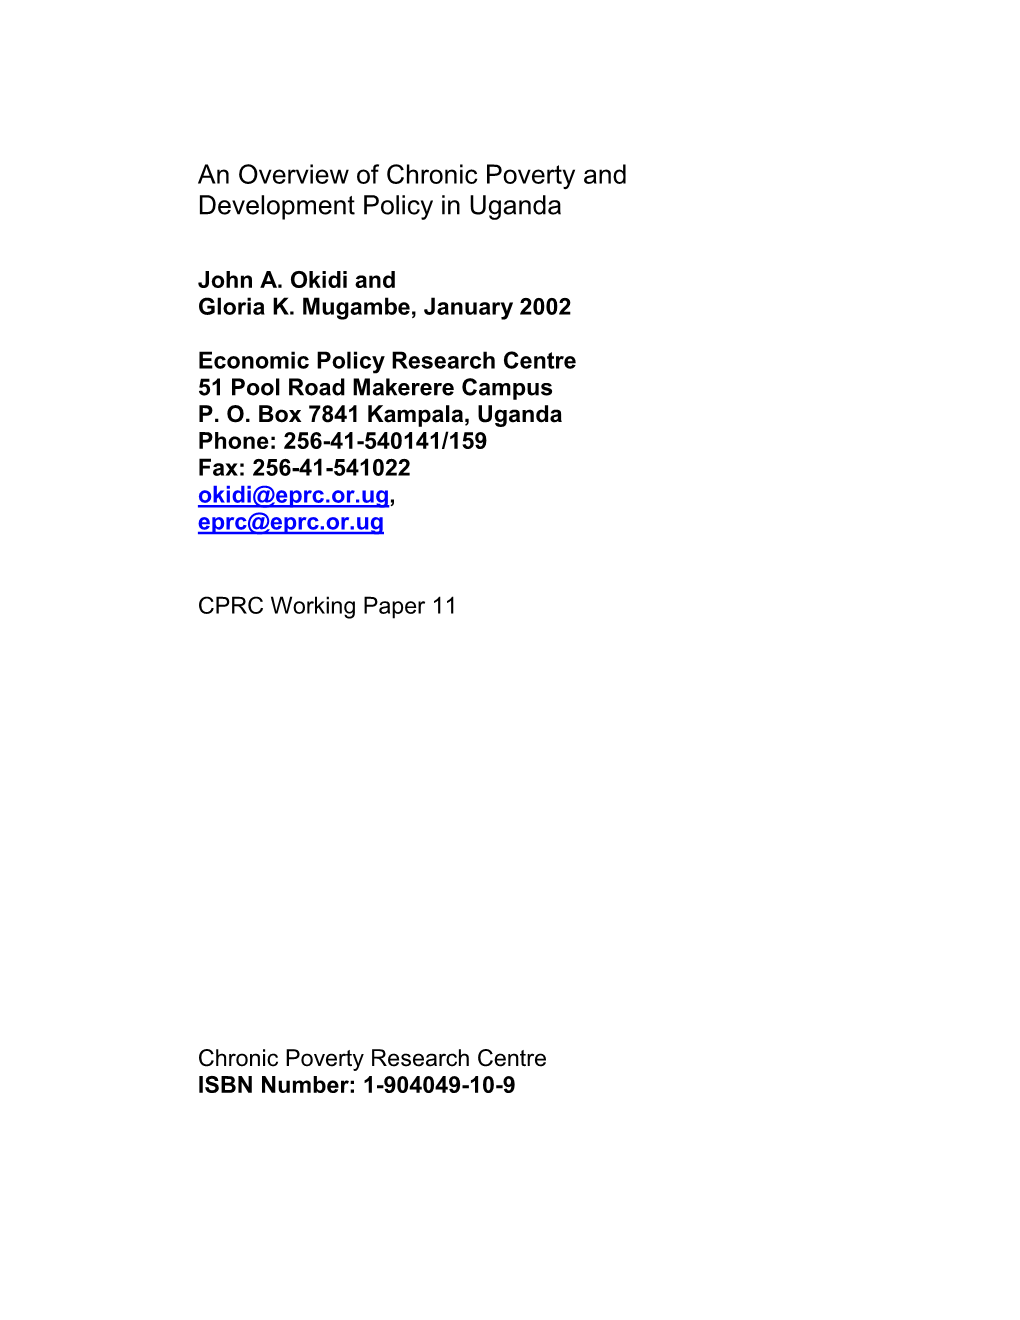 An Overview of Chronic Poverty and Development Policy in Uganda